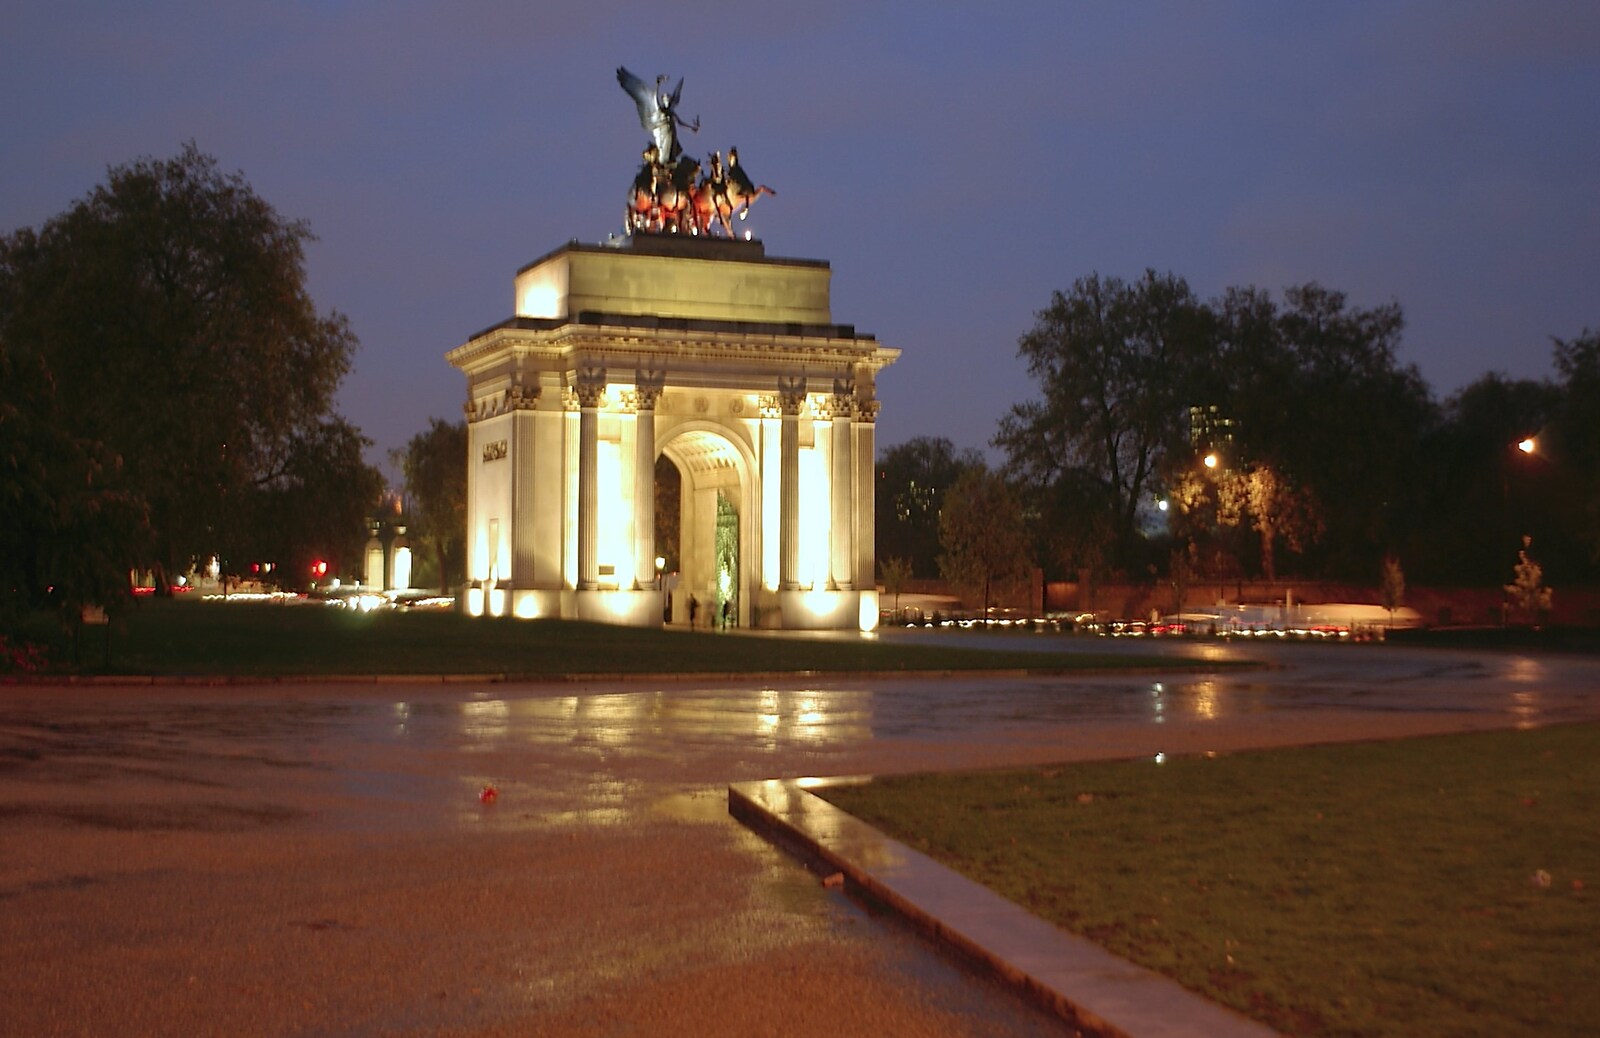 The Wellington Memorial at Hyde Park Corner from London in the Rain - 18th November 2004